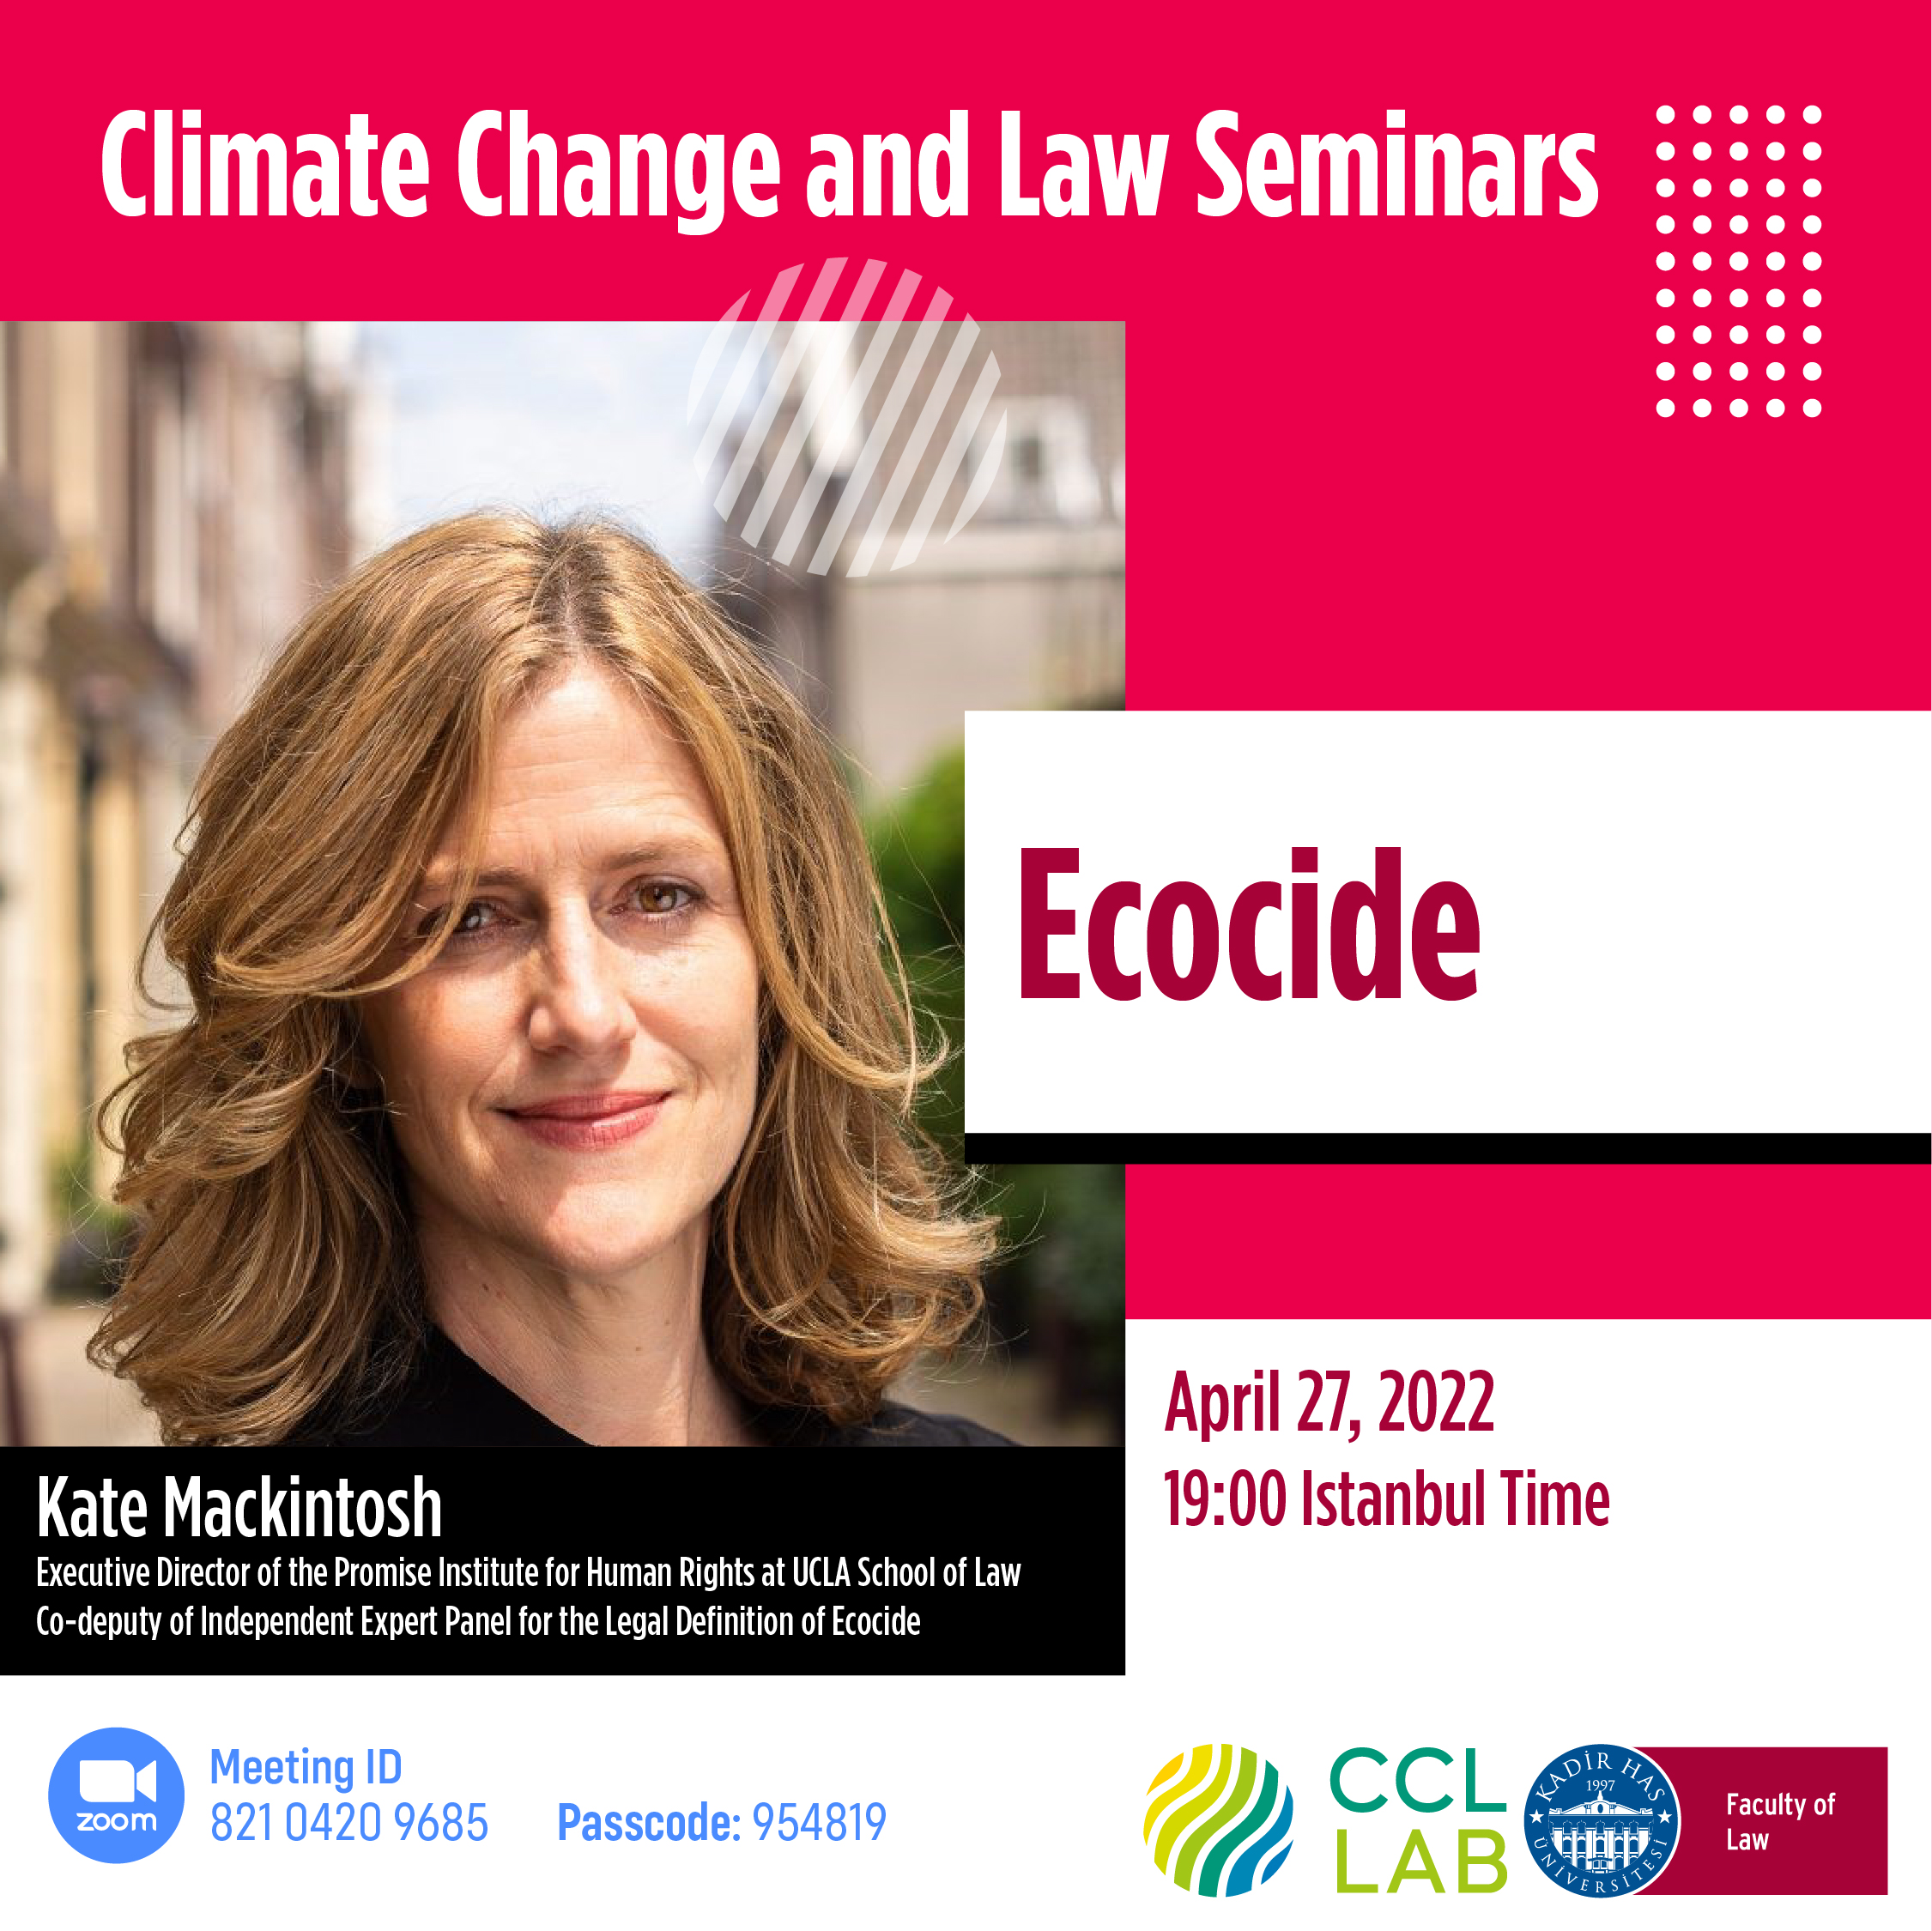 CCLLAB Climate Change and Law Seminars - Kate Mackintosh